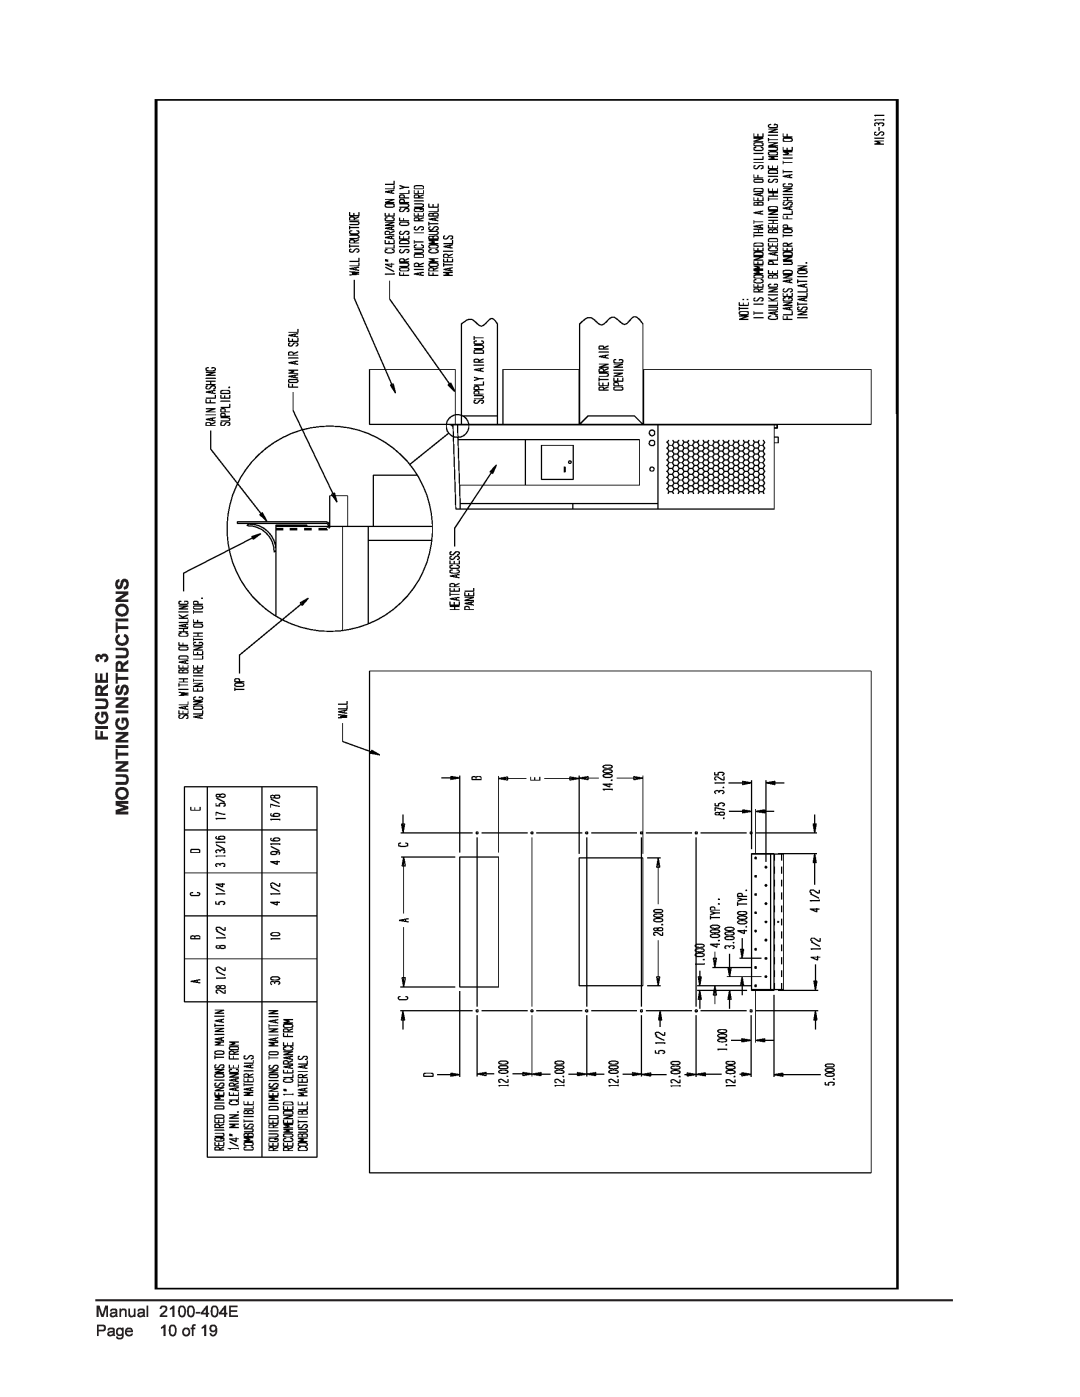 Bard 2100-404E installation instructions Mounting Instructions, Manual, Page, 10 of 